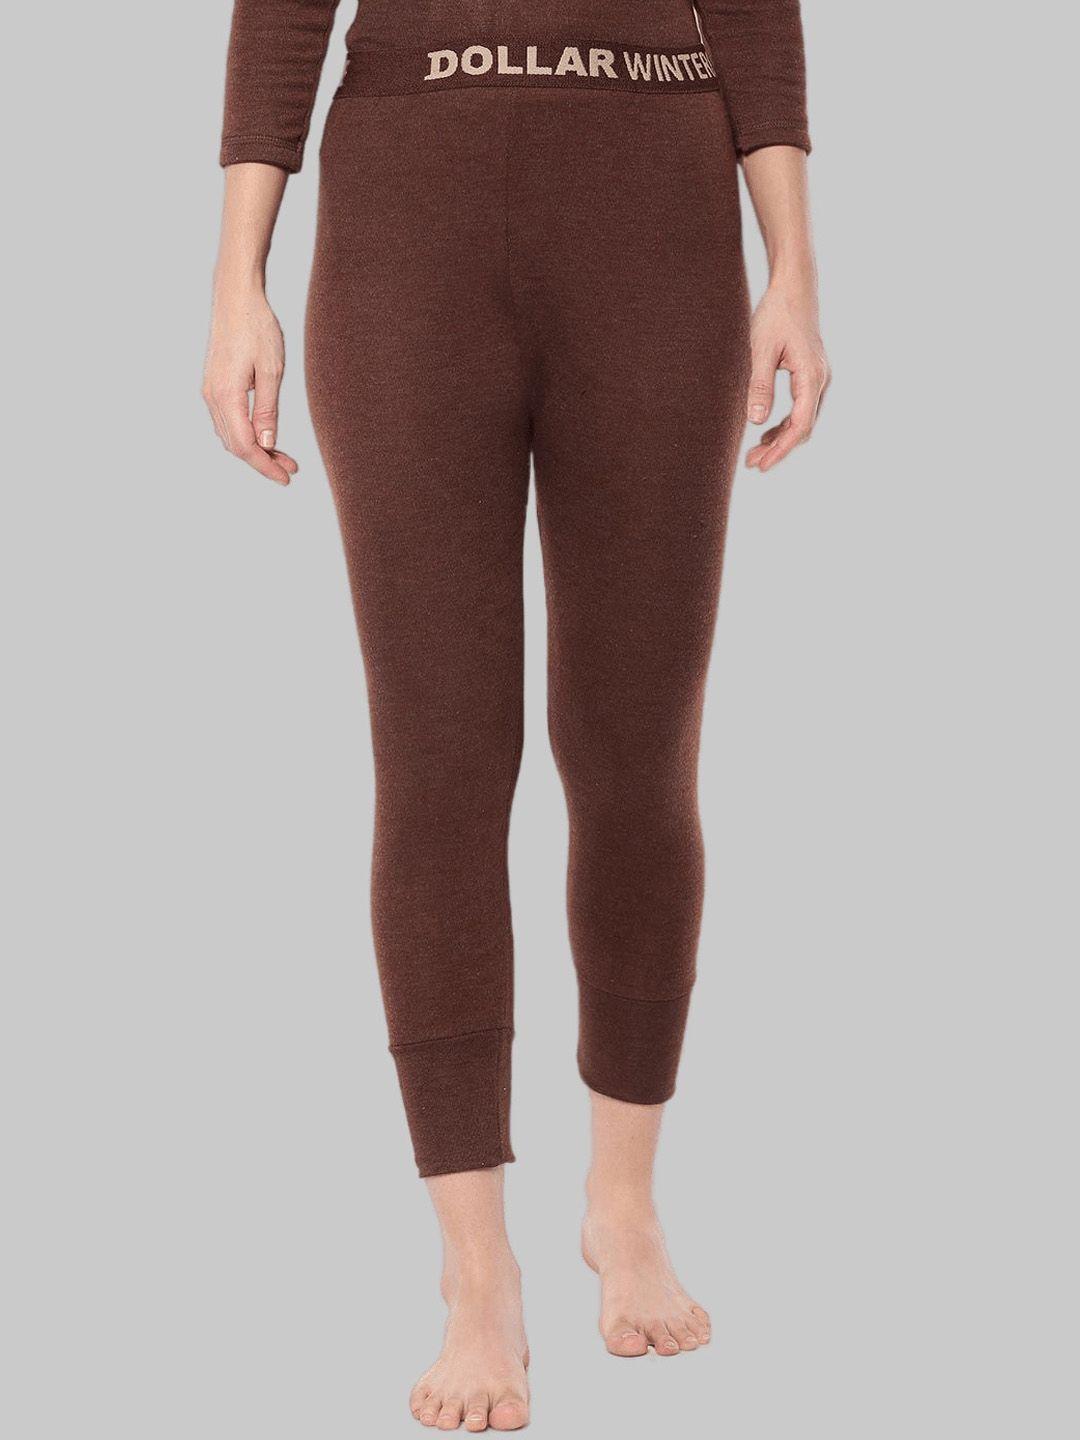 dollar-women-brown-solid-cotton-thermal-bottoms